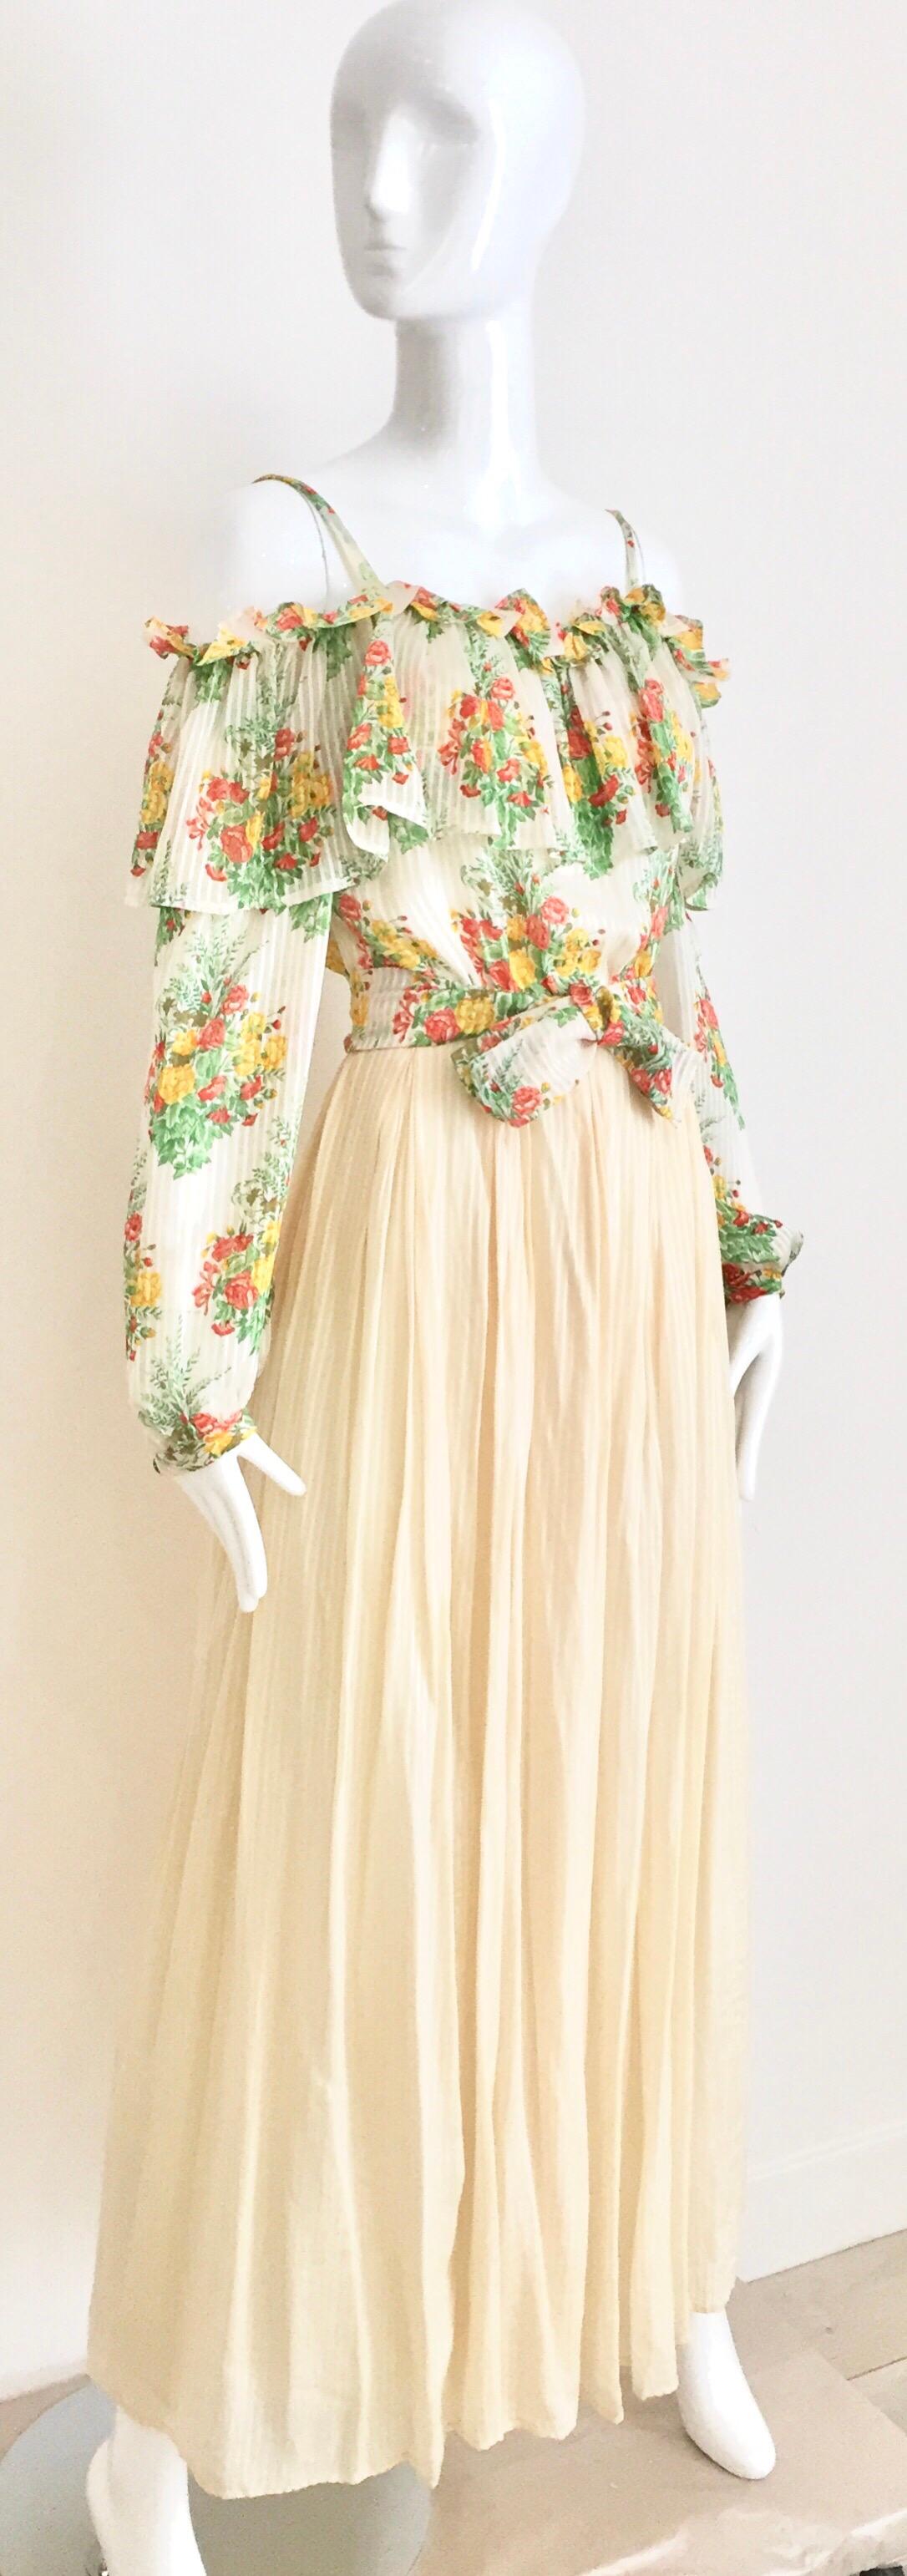 1970s  creme Andre Laug silk chiffon off shoulder maxi dress. Perfect for summer party or wedding. 
Size: Small 
Bust: 32 inches/ Waist: 25 inches / Hip: free/ Dress length: 54.5 inches
***This garment has been professionally Dry Cleaned and Ready